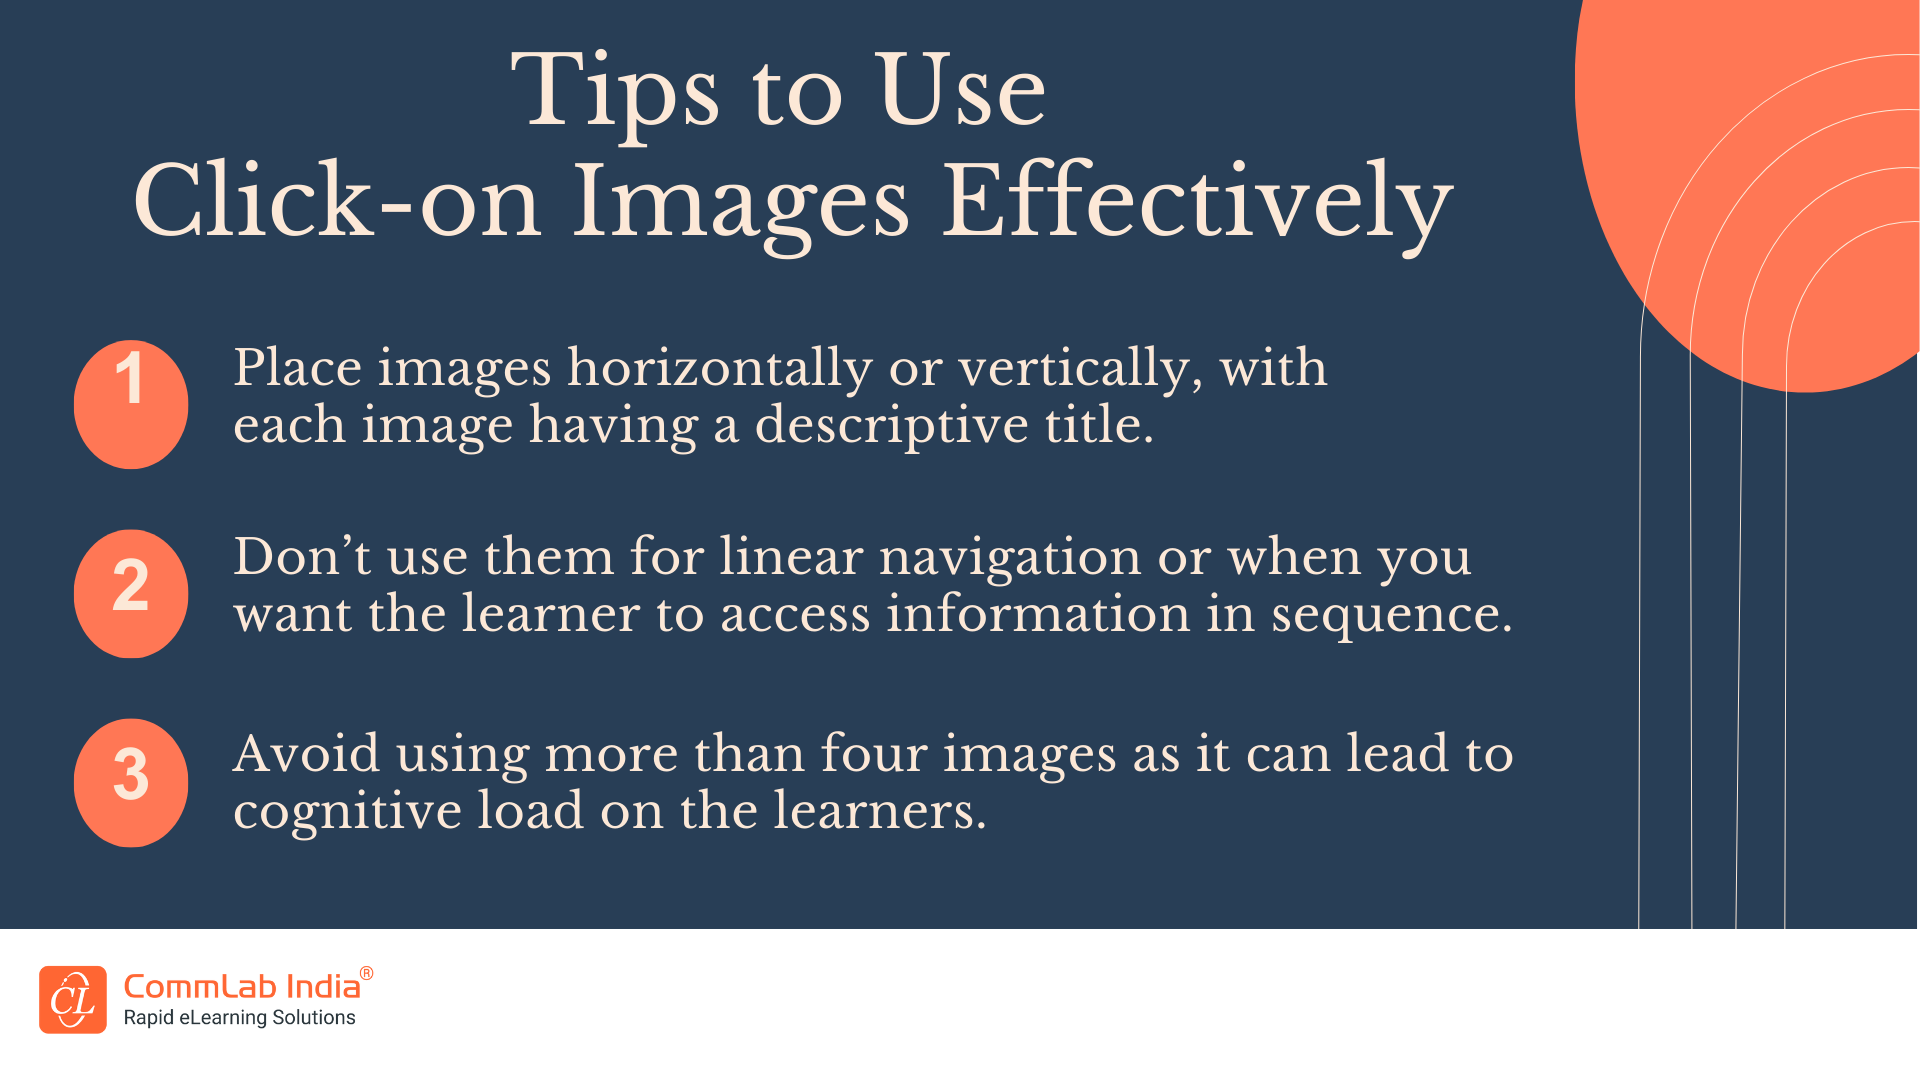 eLearning Interactivities Tips to Use Click-on Images Effectively